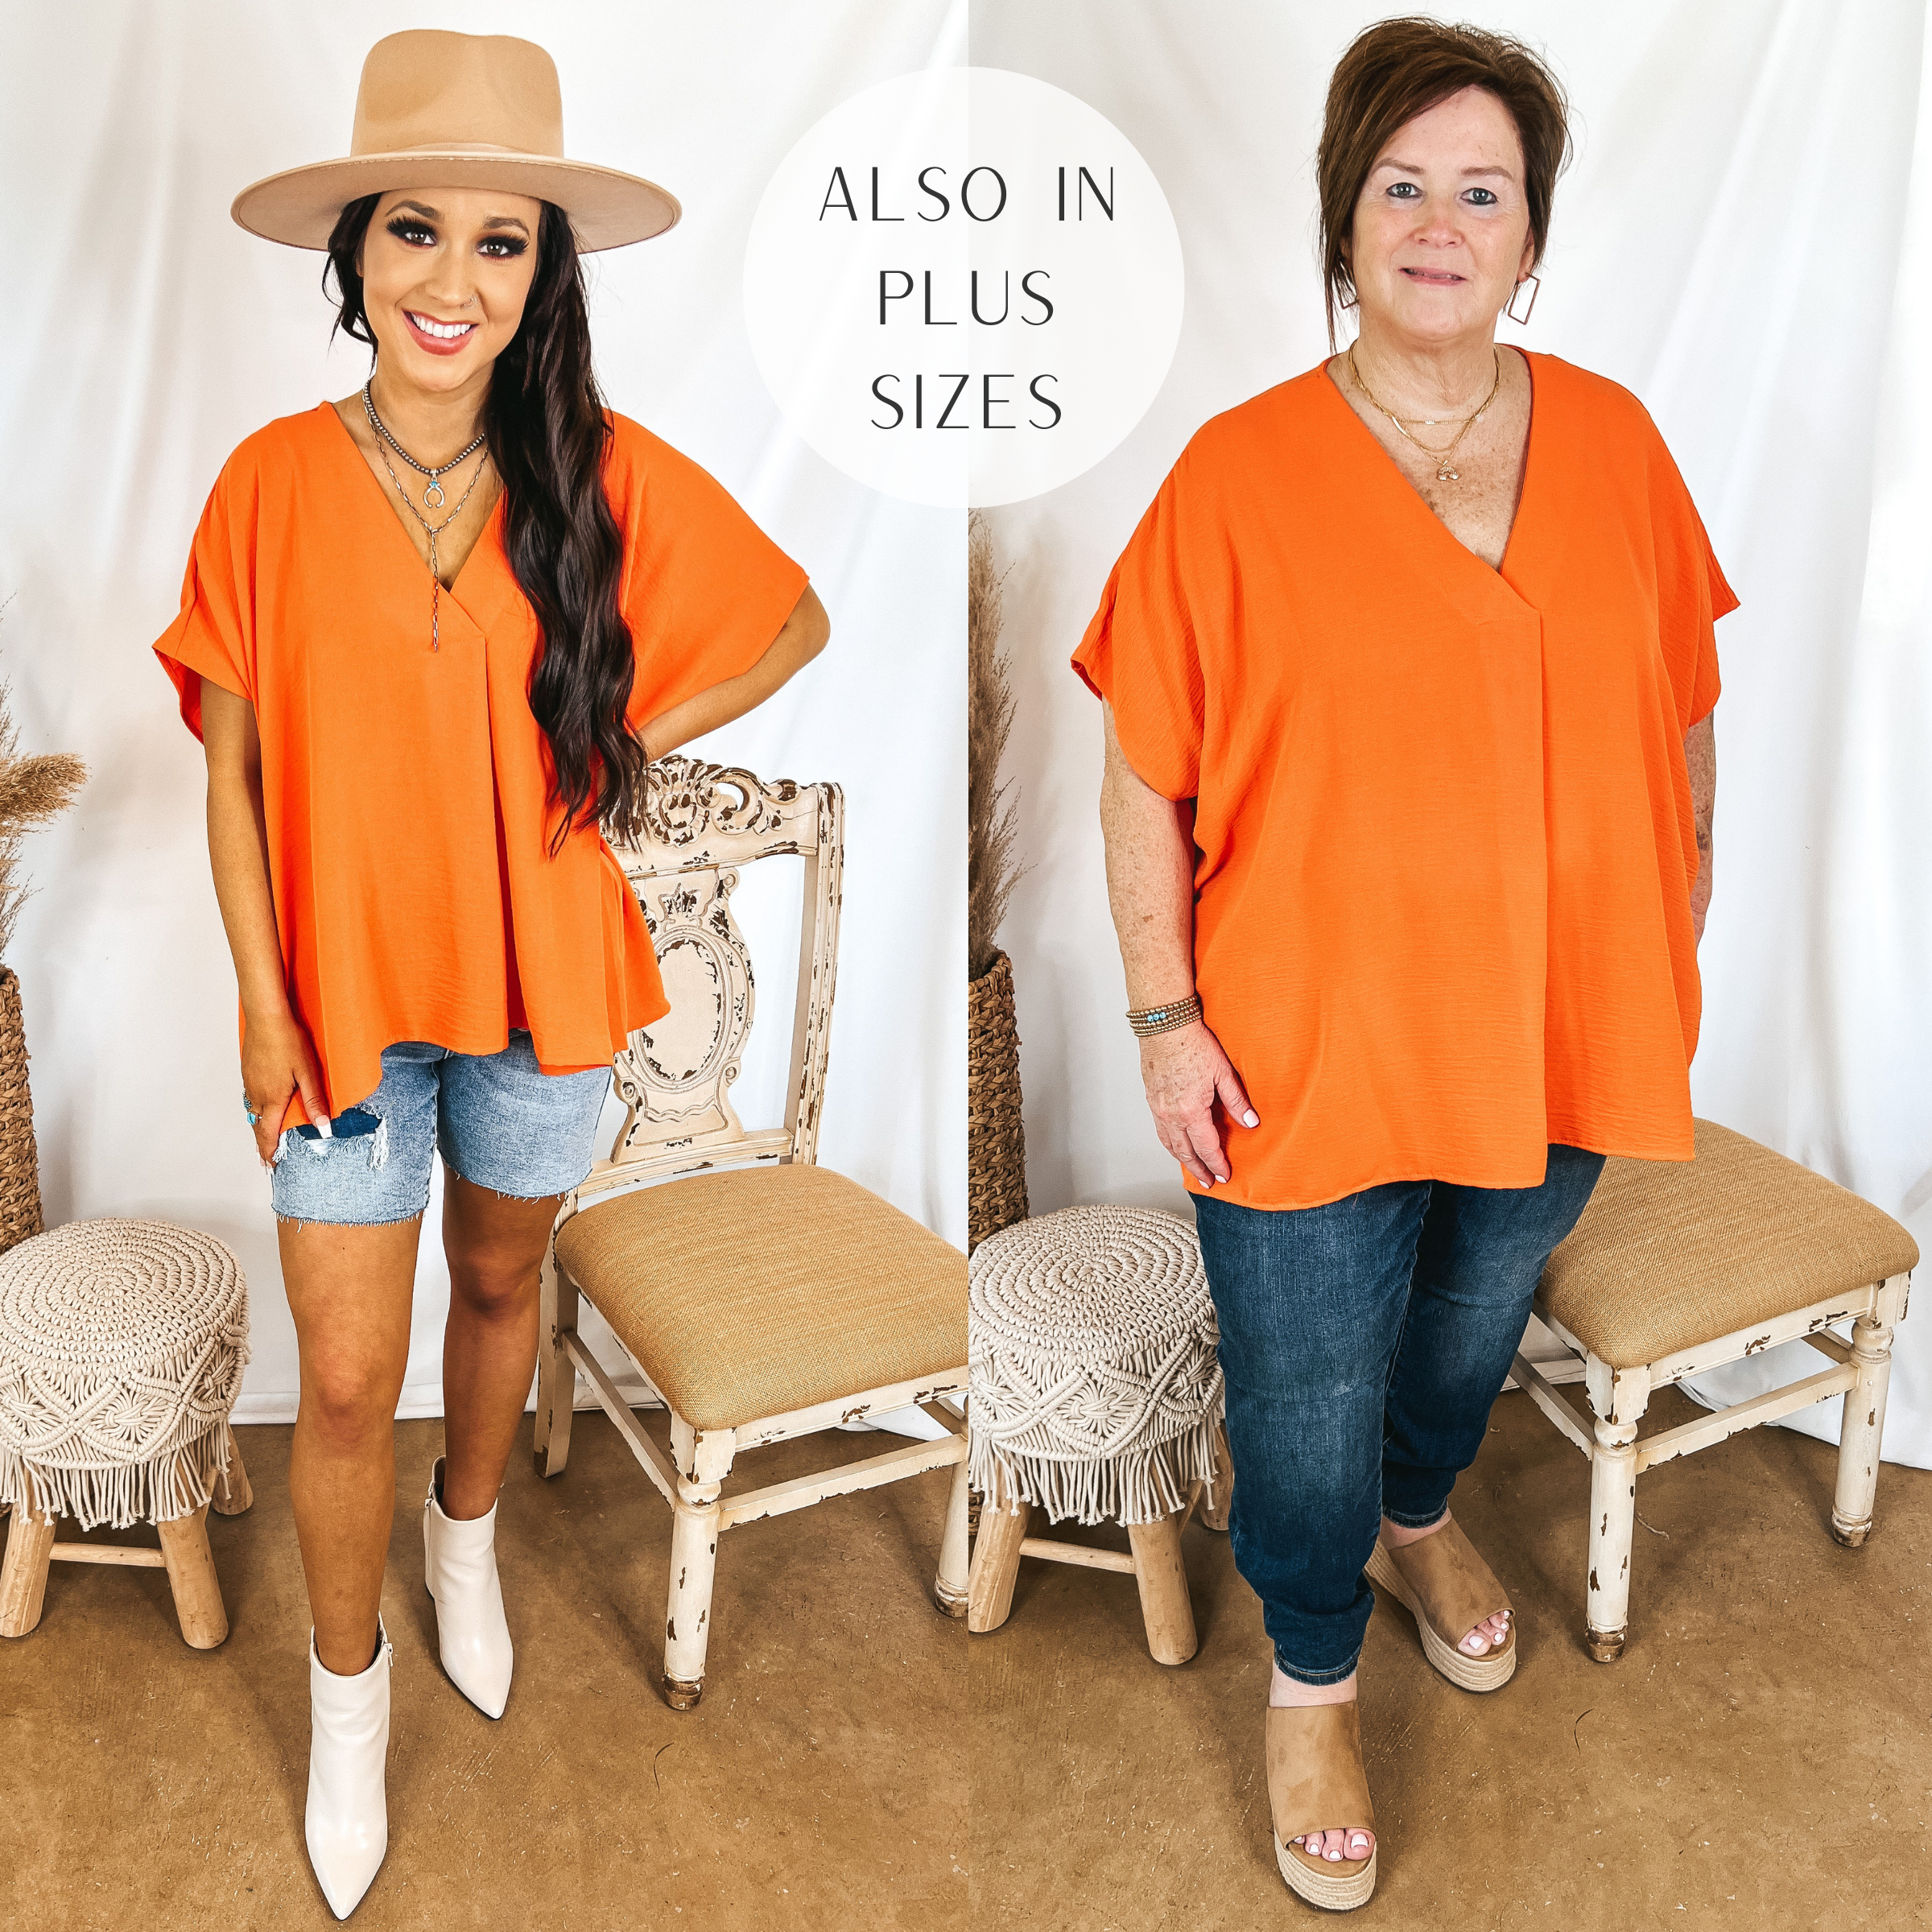 Models are wearing an orange top that has a v neck placket. Size small model has it paired with white booties and bermuda shorts. Plus size model has it paired with dark wash skinny jeans, tan wedges, and gold jewelry.